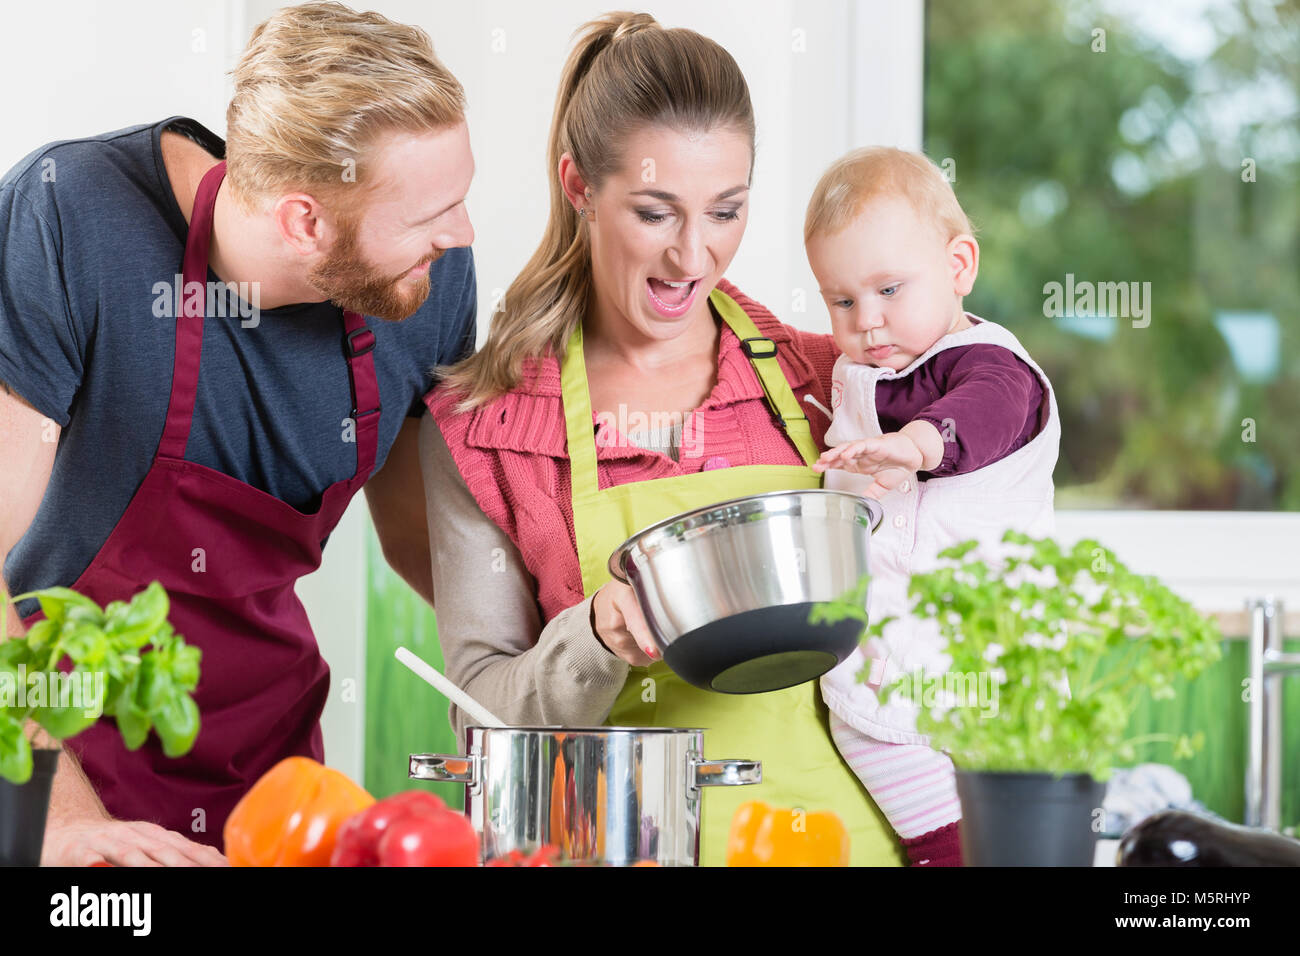 Mom, dad and child in kitchen Stock Photo